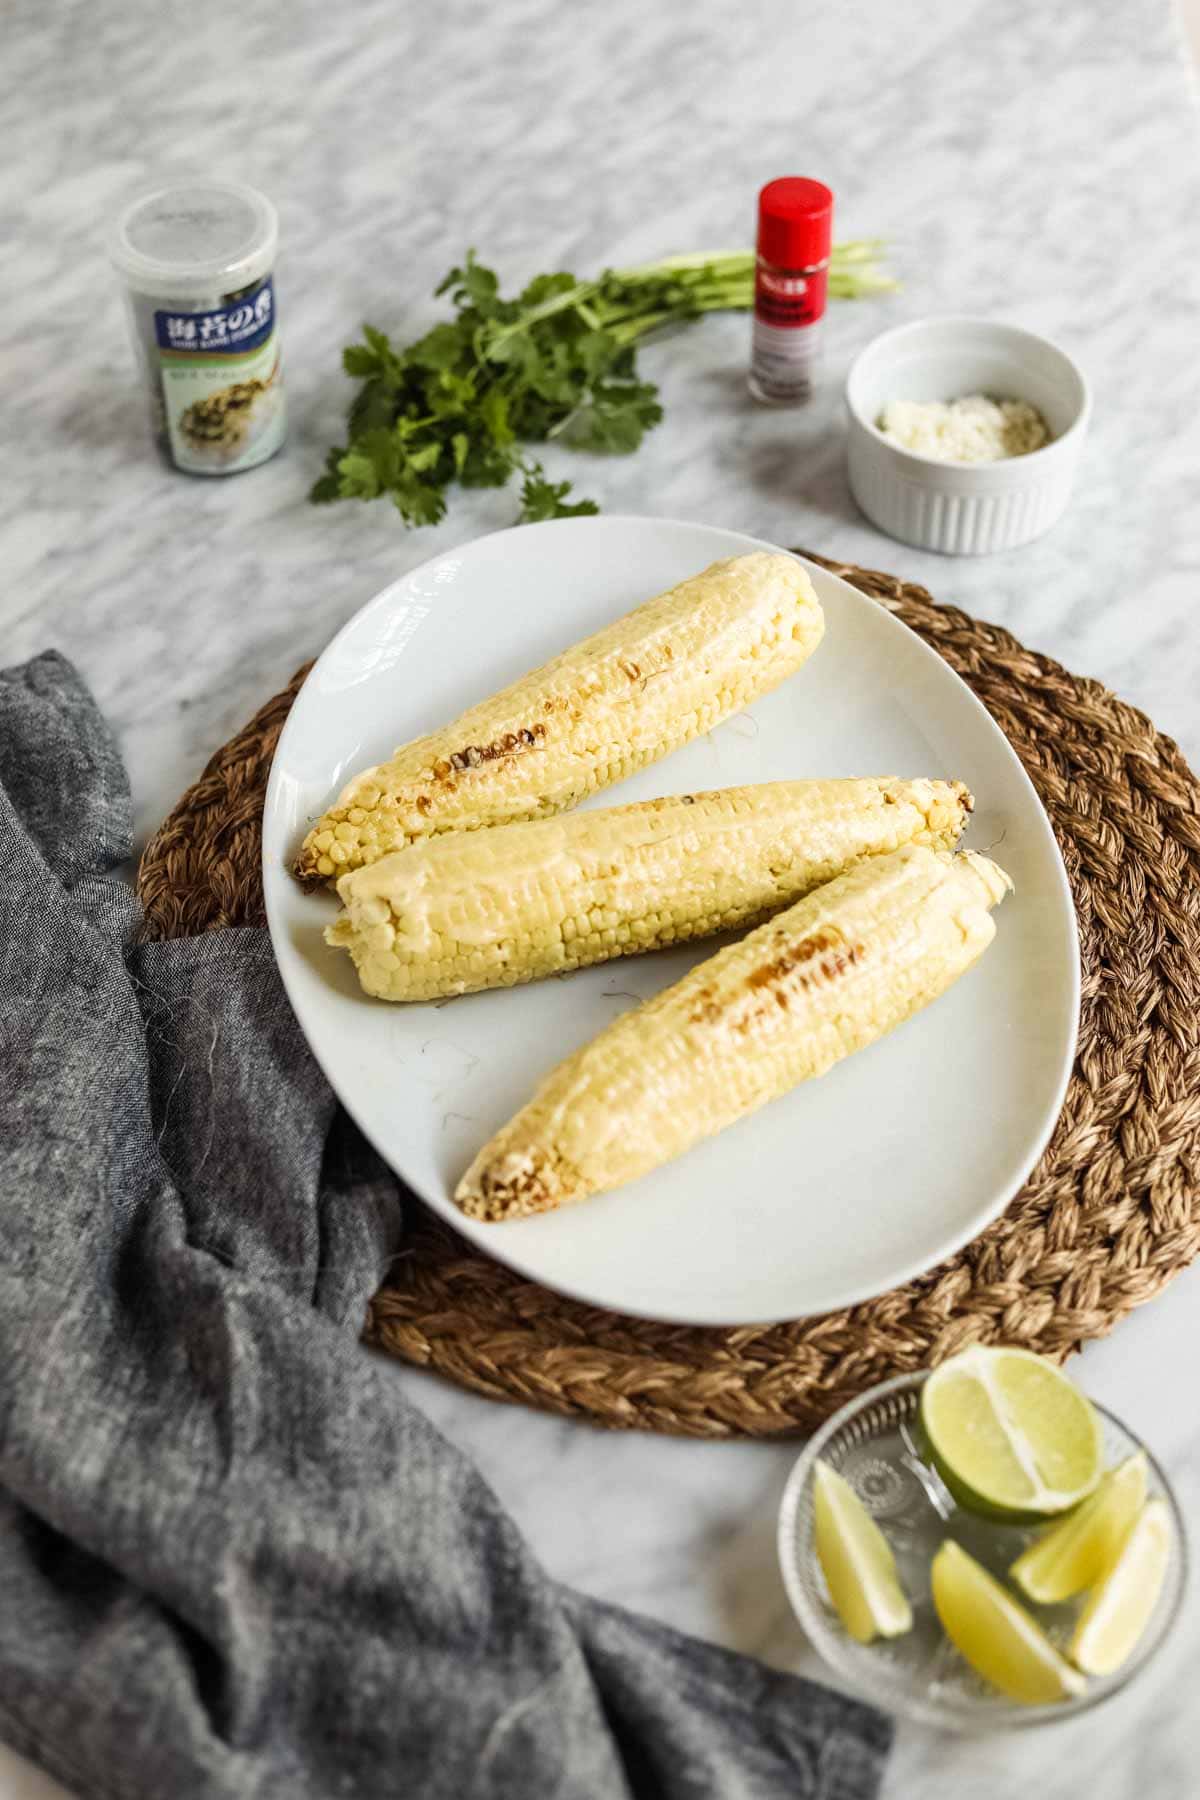 Elote-style corn with kewpie mayo and limes.